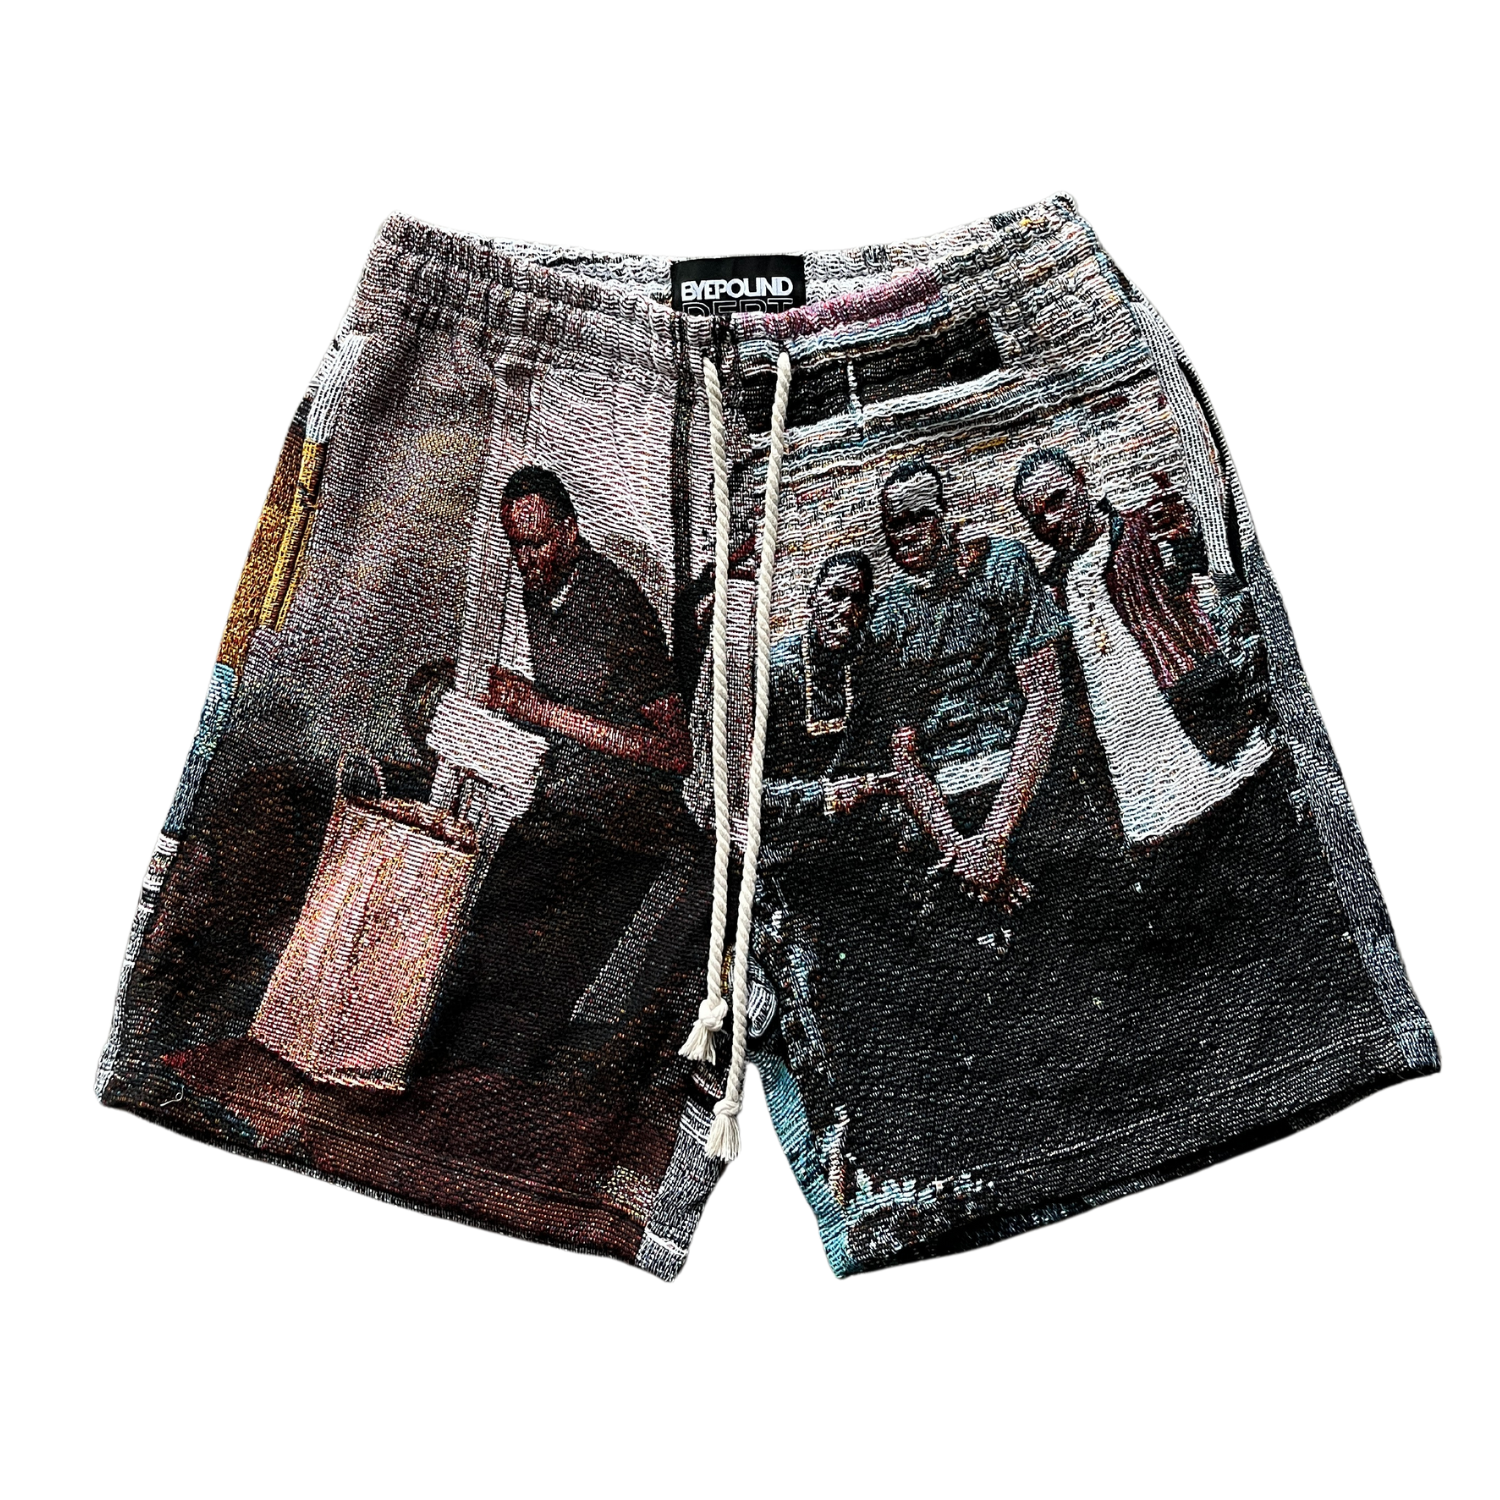 Paid In Full - Byepound Dept Shorts